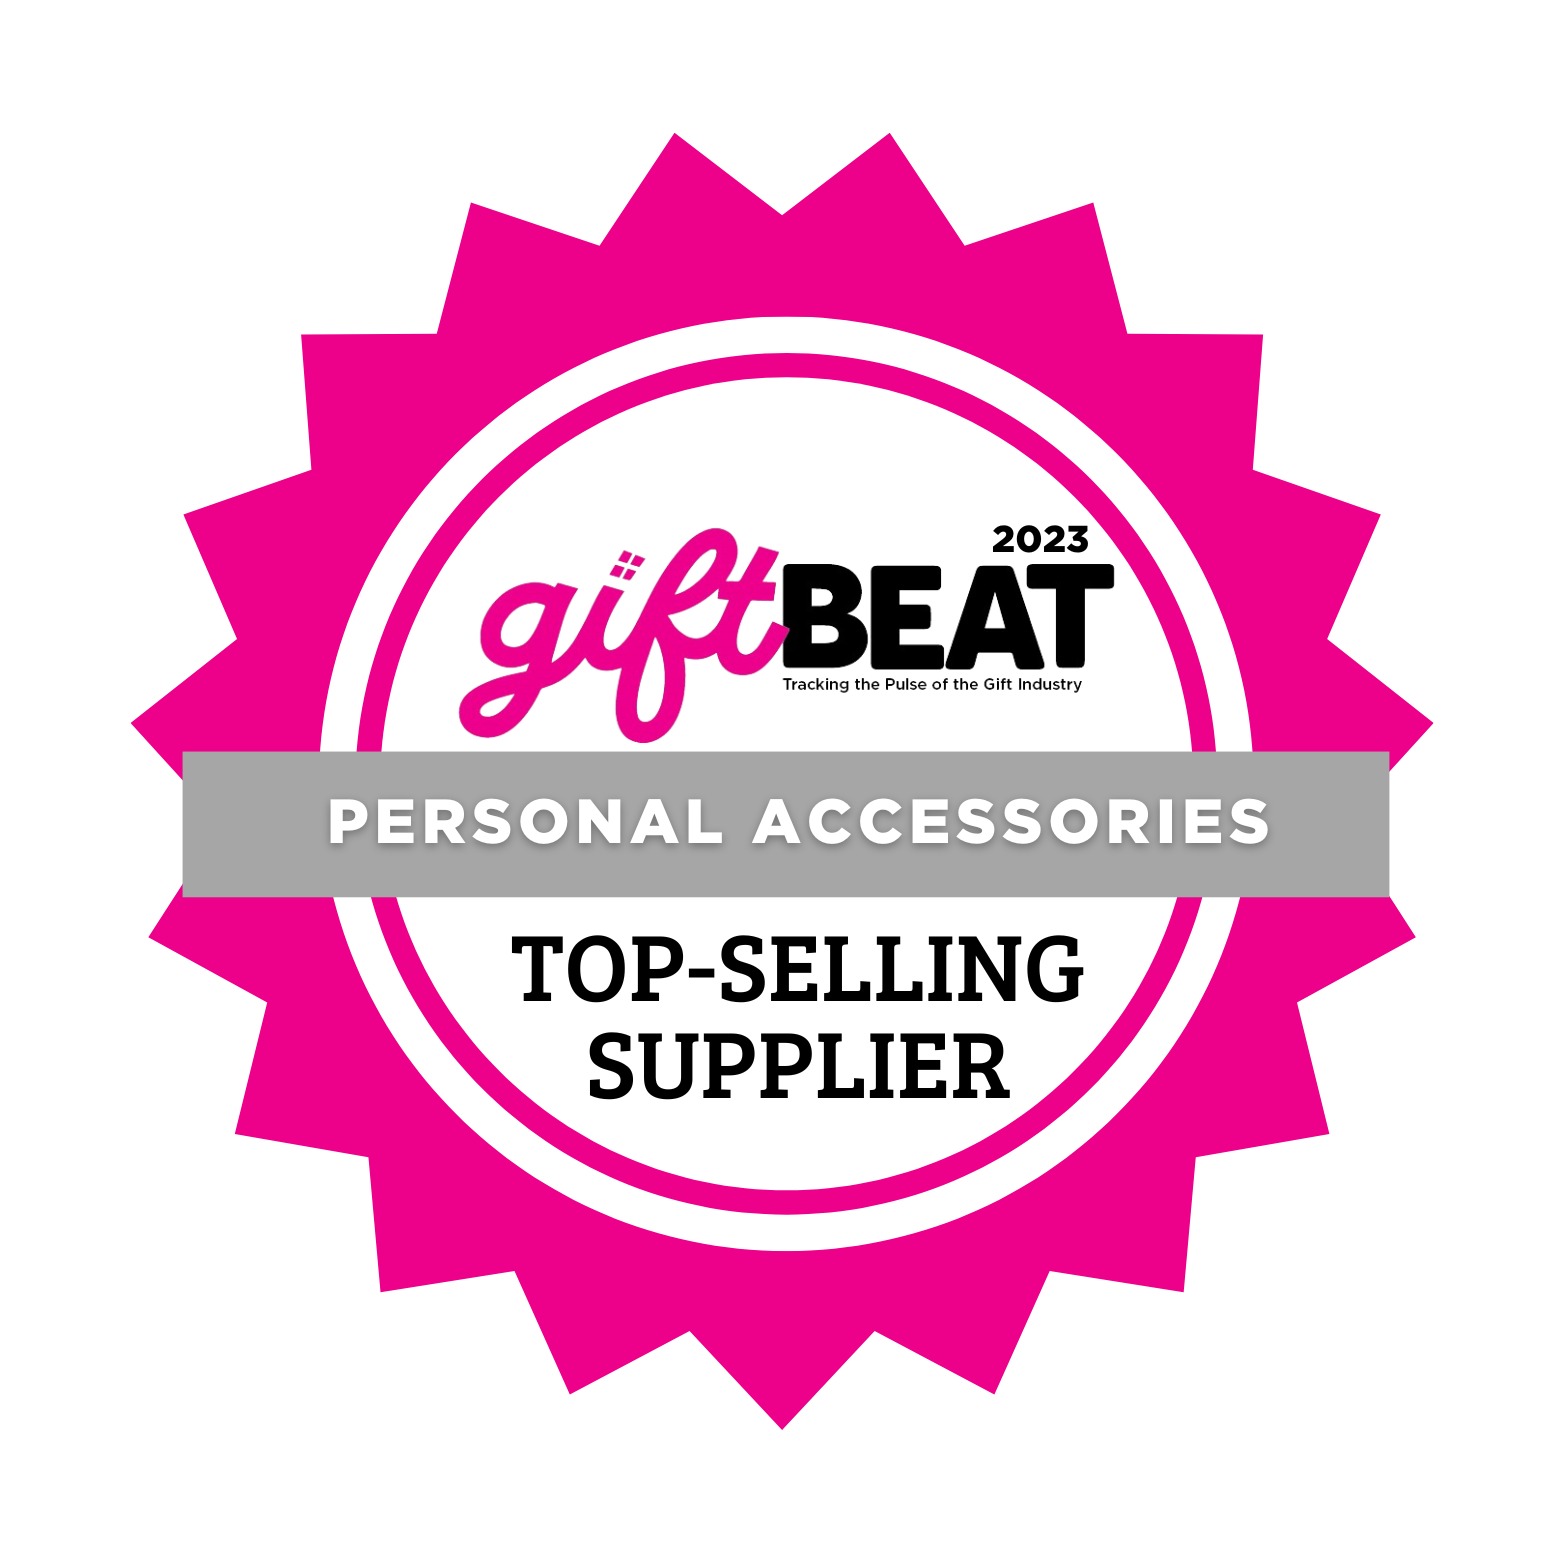 2023 Top Selling Supplier - Personal Accessories